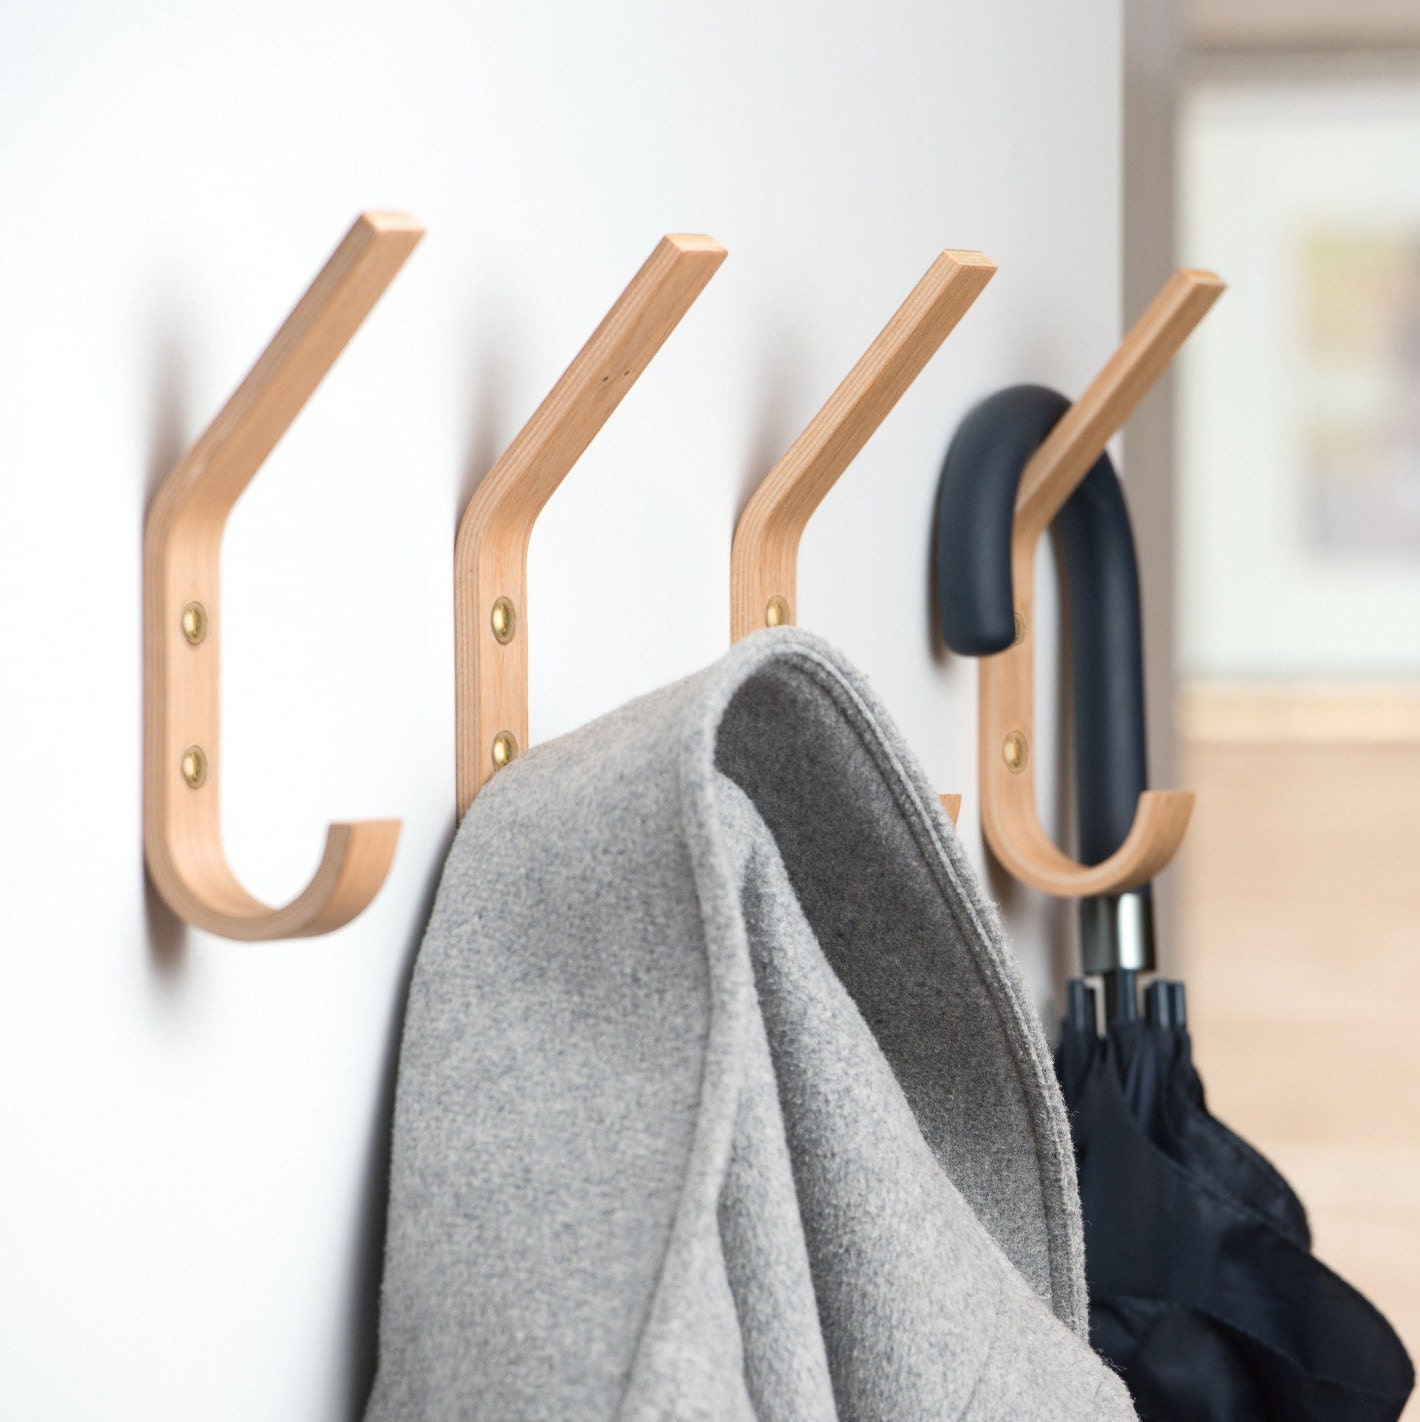 Set of 4 Wooden Mounted Single Wall Hooks for Storage Organisation